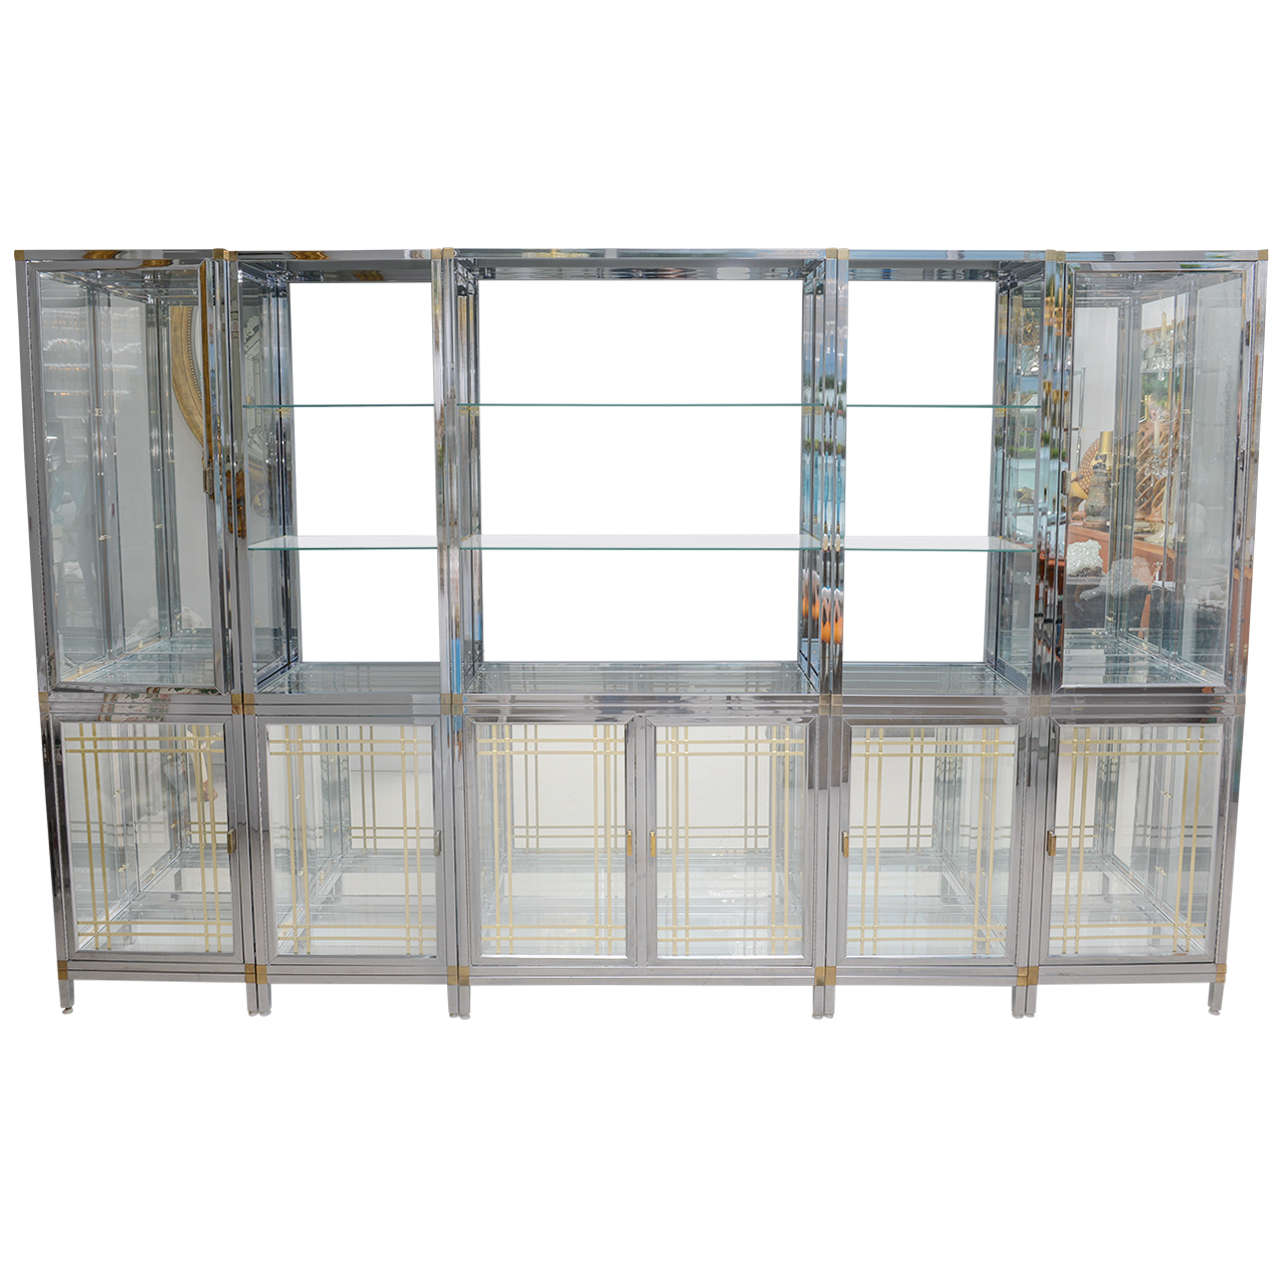 Shop Display of Chrome and Brass Wall Unit